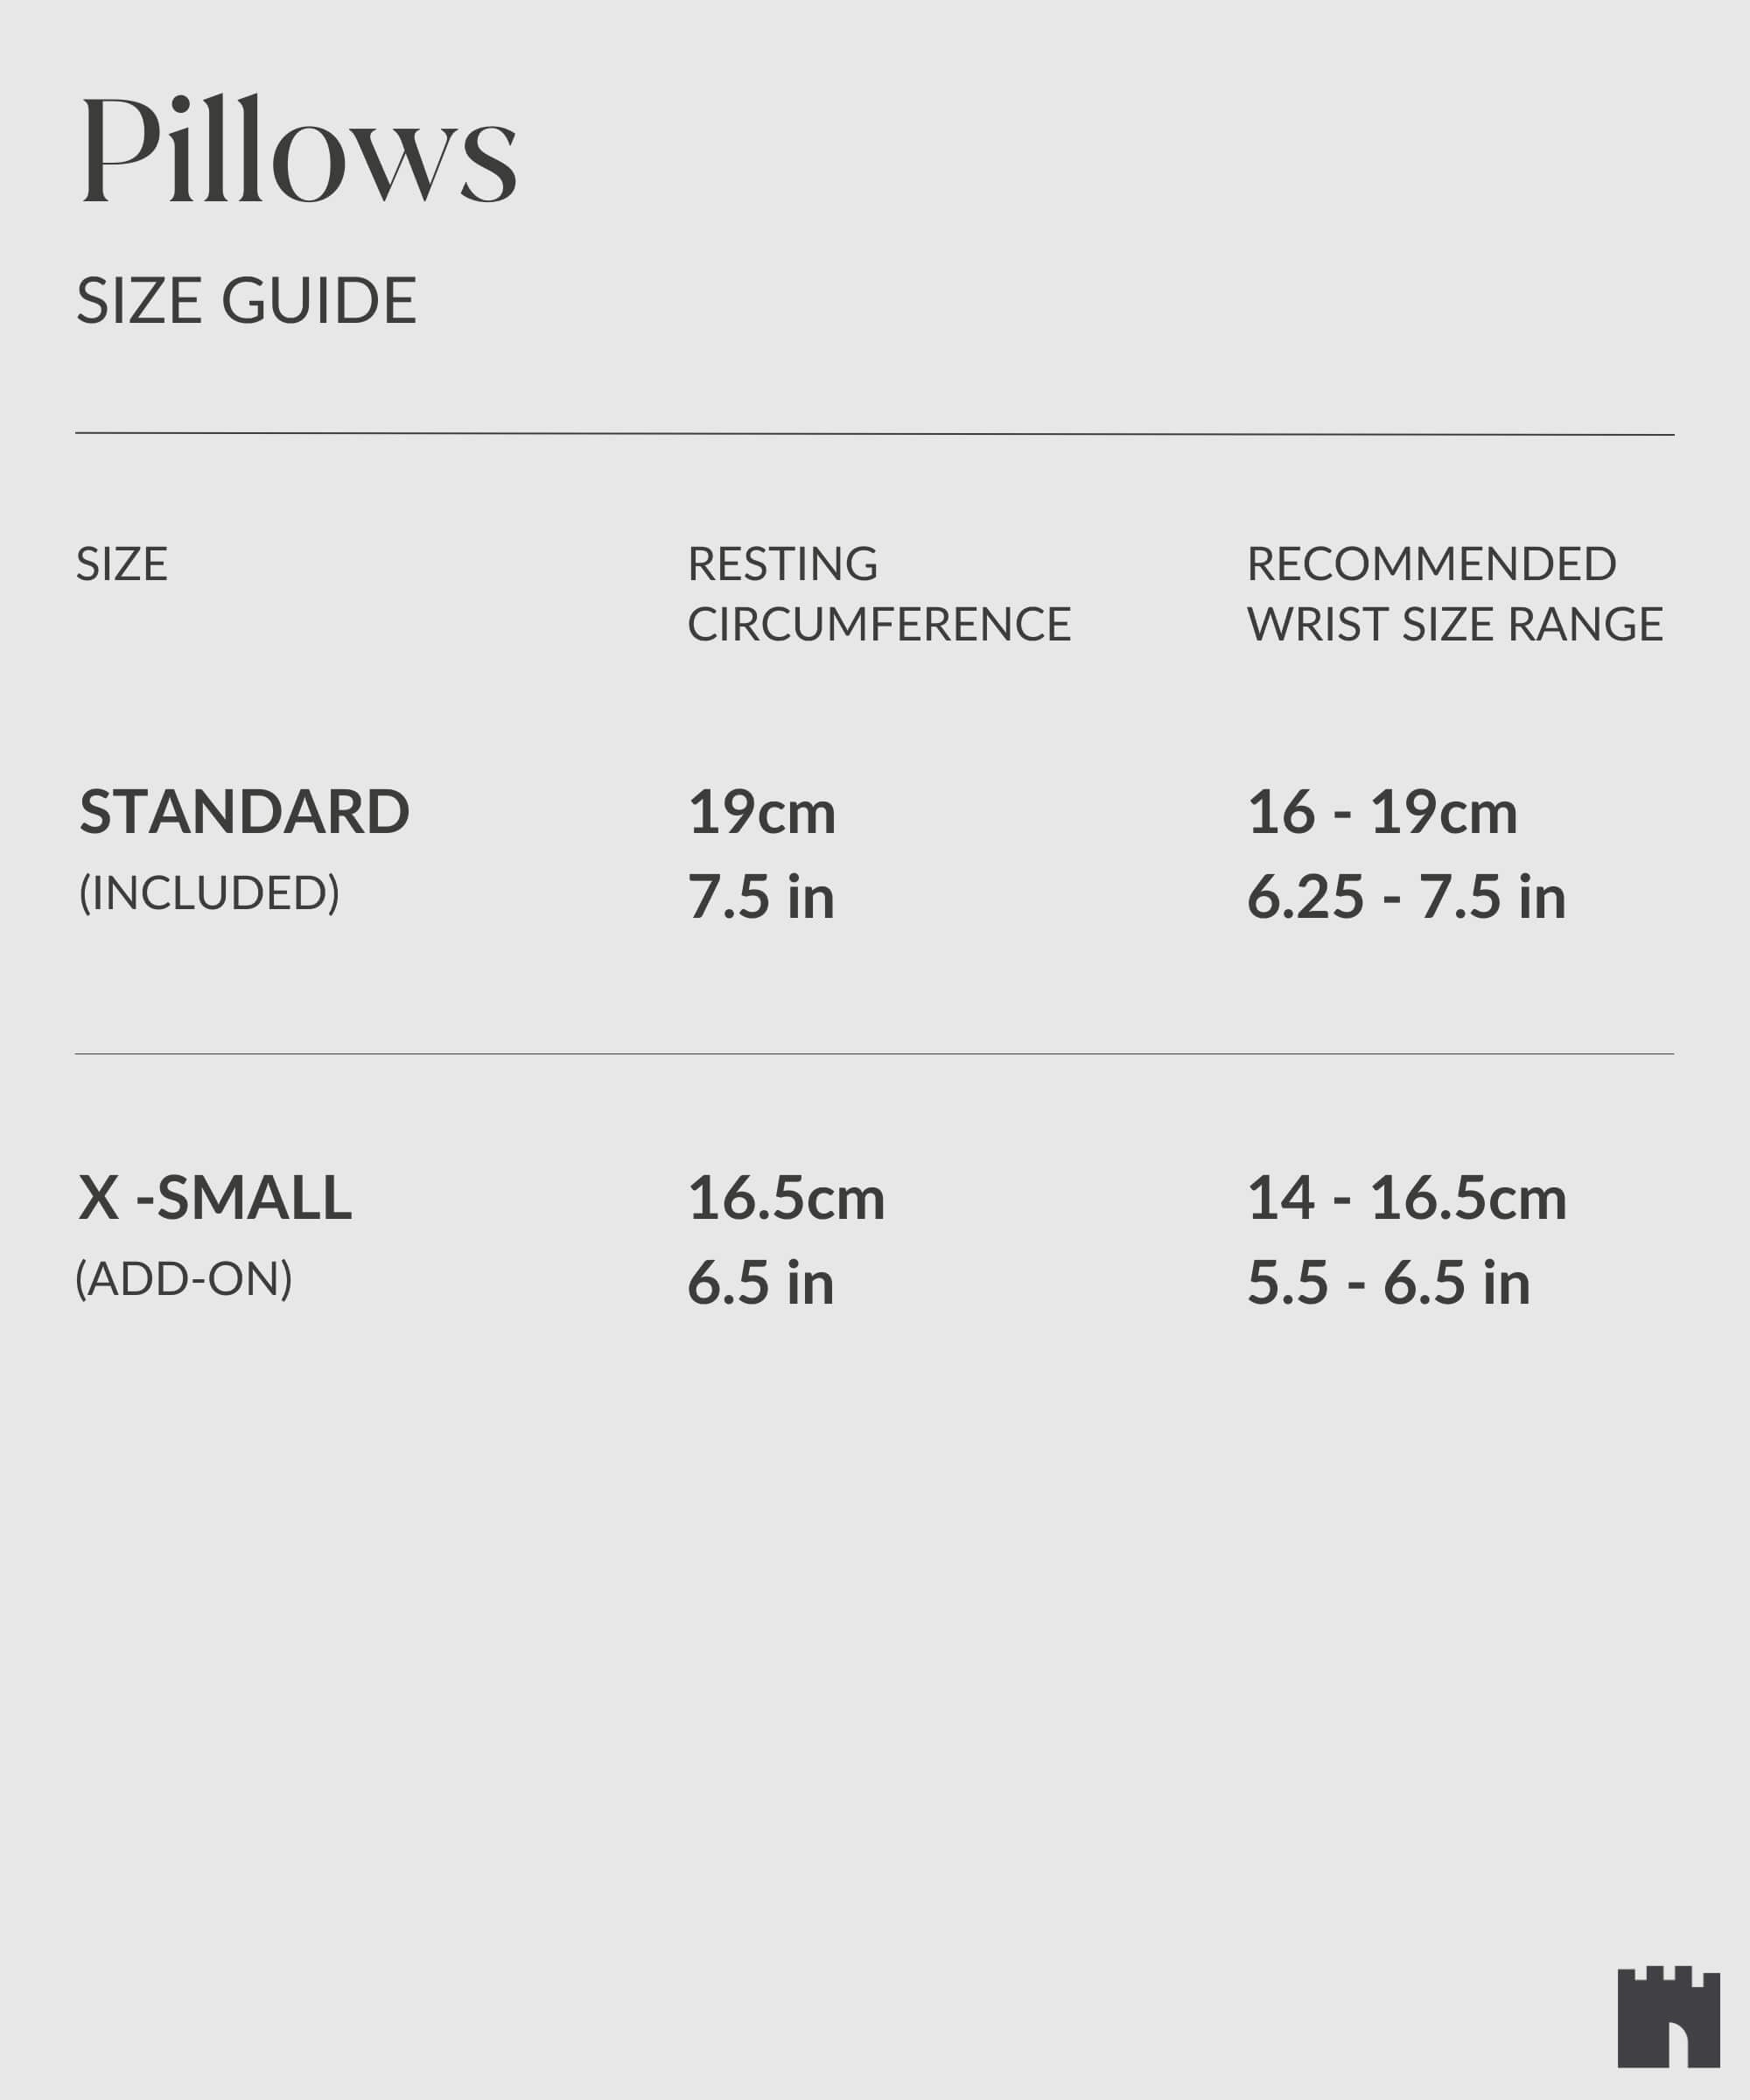 Size guide for pillows showing resting circumference and recommended wrist size range for standard (19cm, 16-19cm) and x-small (16.5cm, 14-16.5cm) sizes. Perfect for fitting into your TAWBURY Fraser 6 Watch Travel Case - Brown (Coming Soon) or any leather watch case designed for premium watch storage.